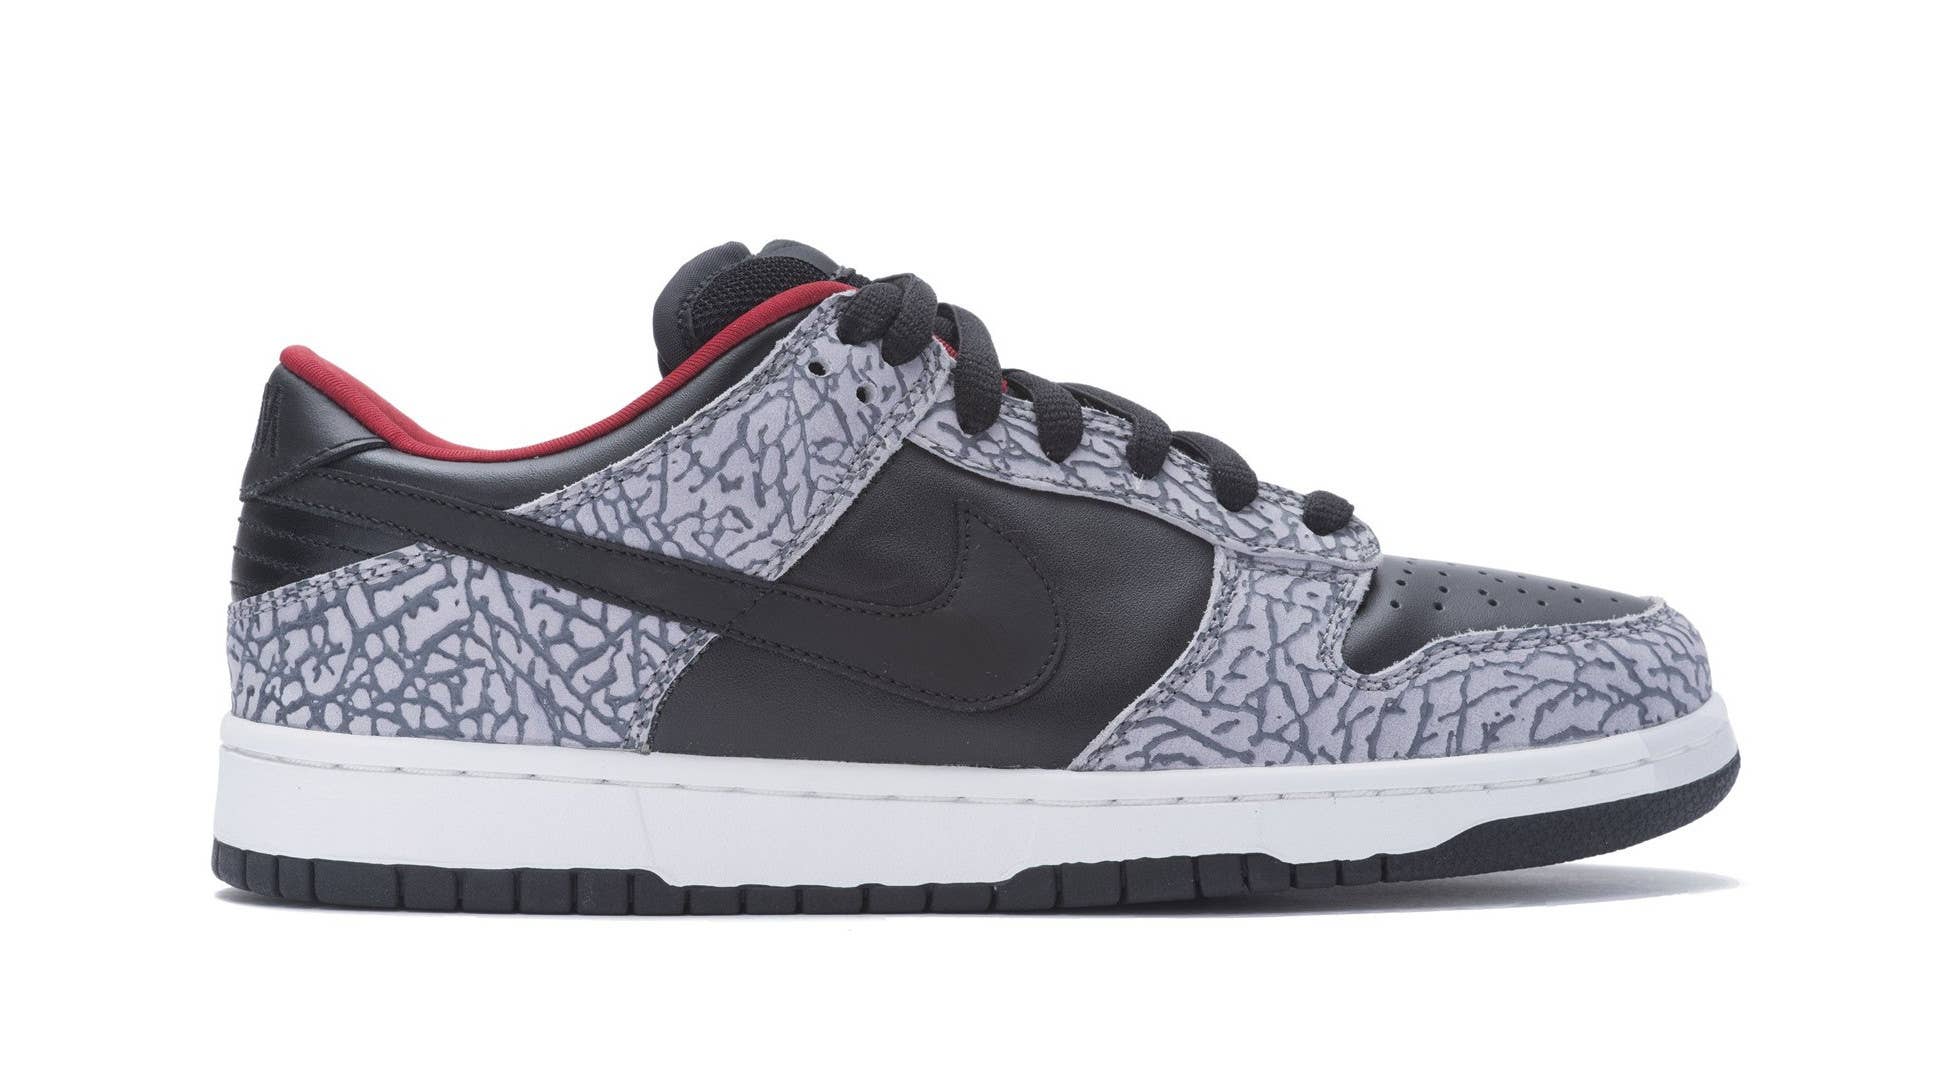 Supreme x Nike SB Dunk Low 'Black Cement' 304292 131 Release Date